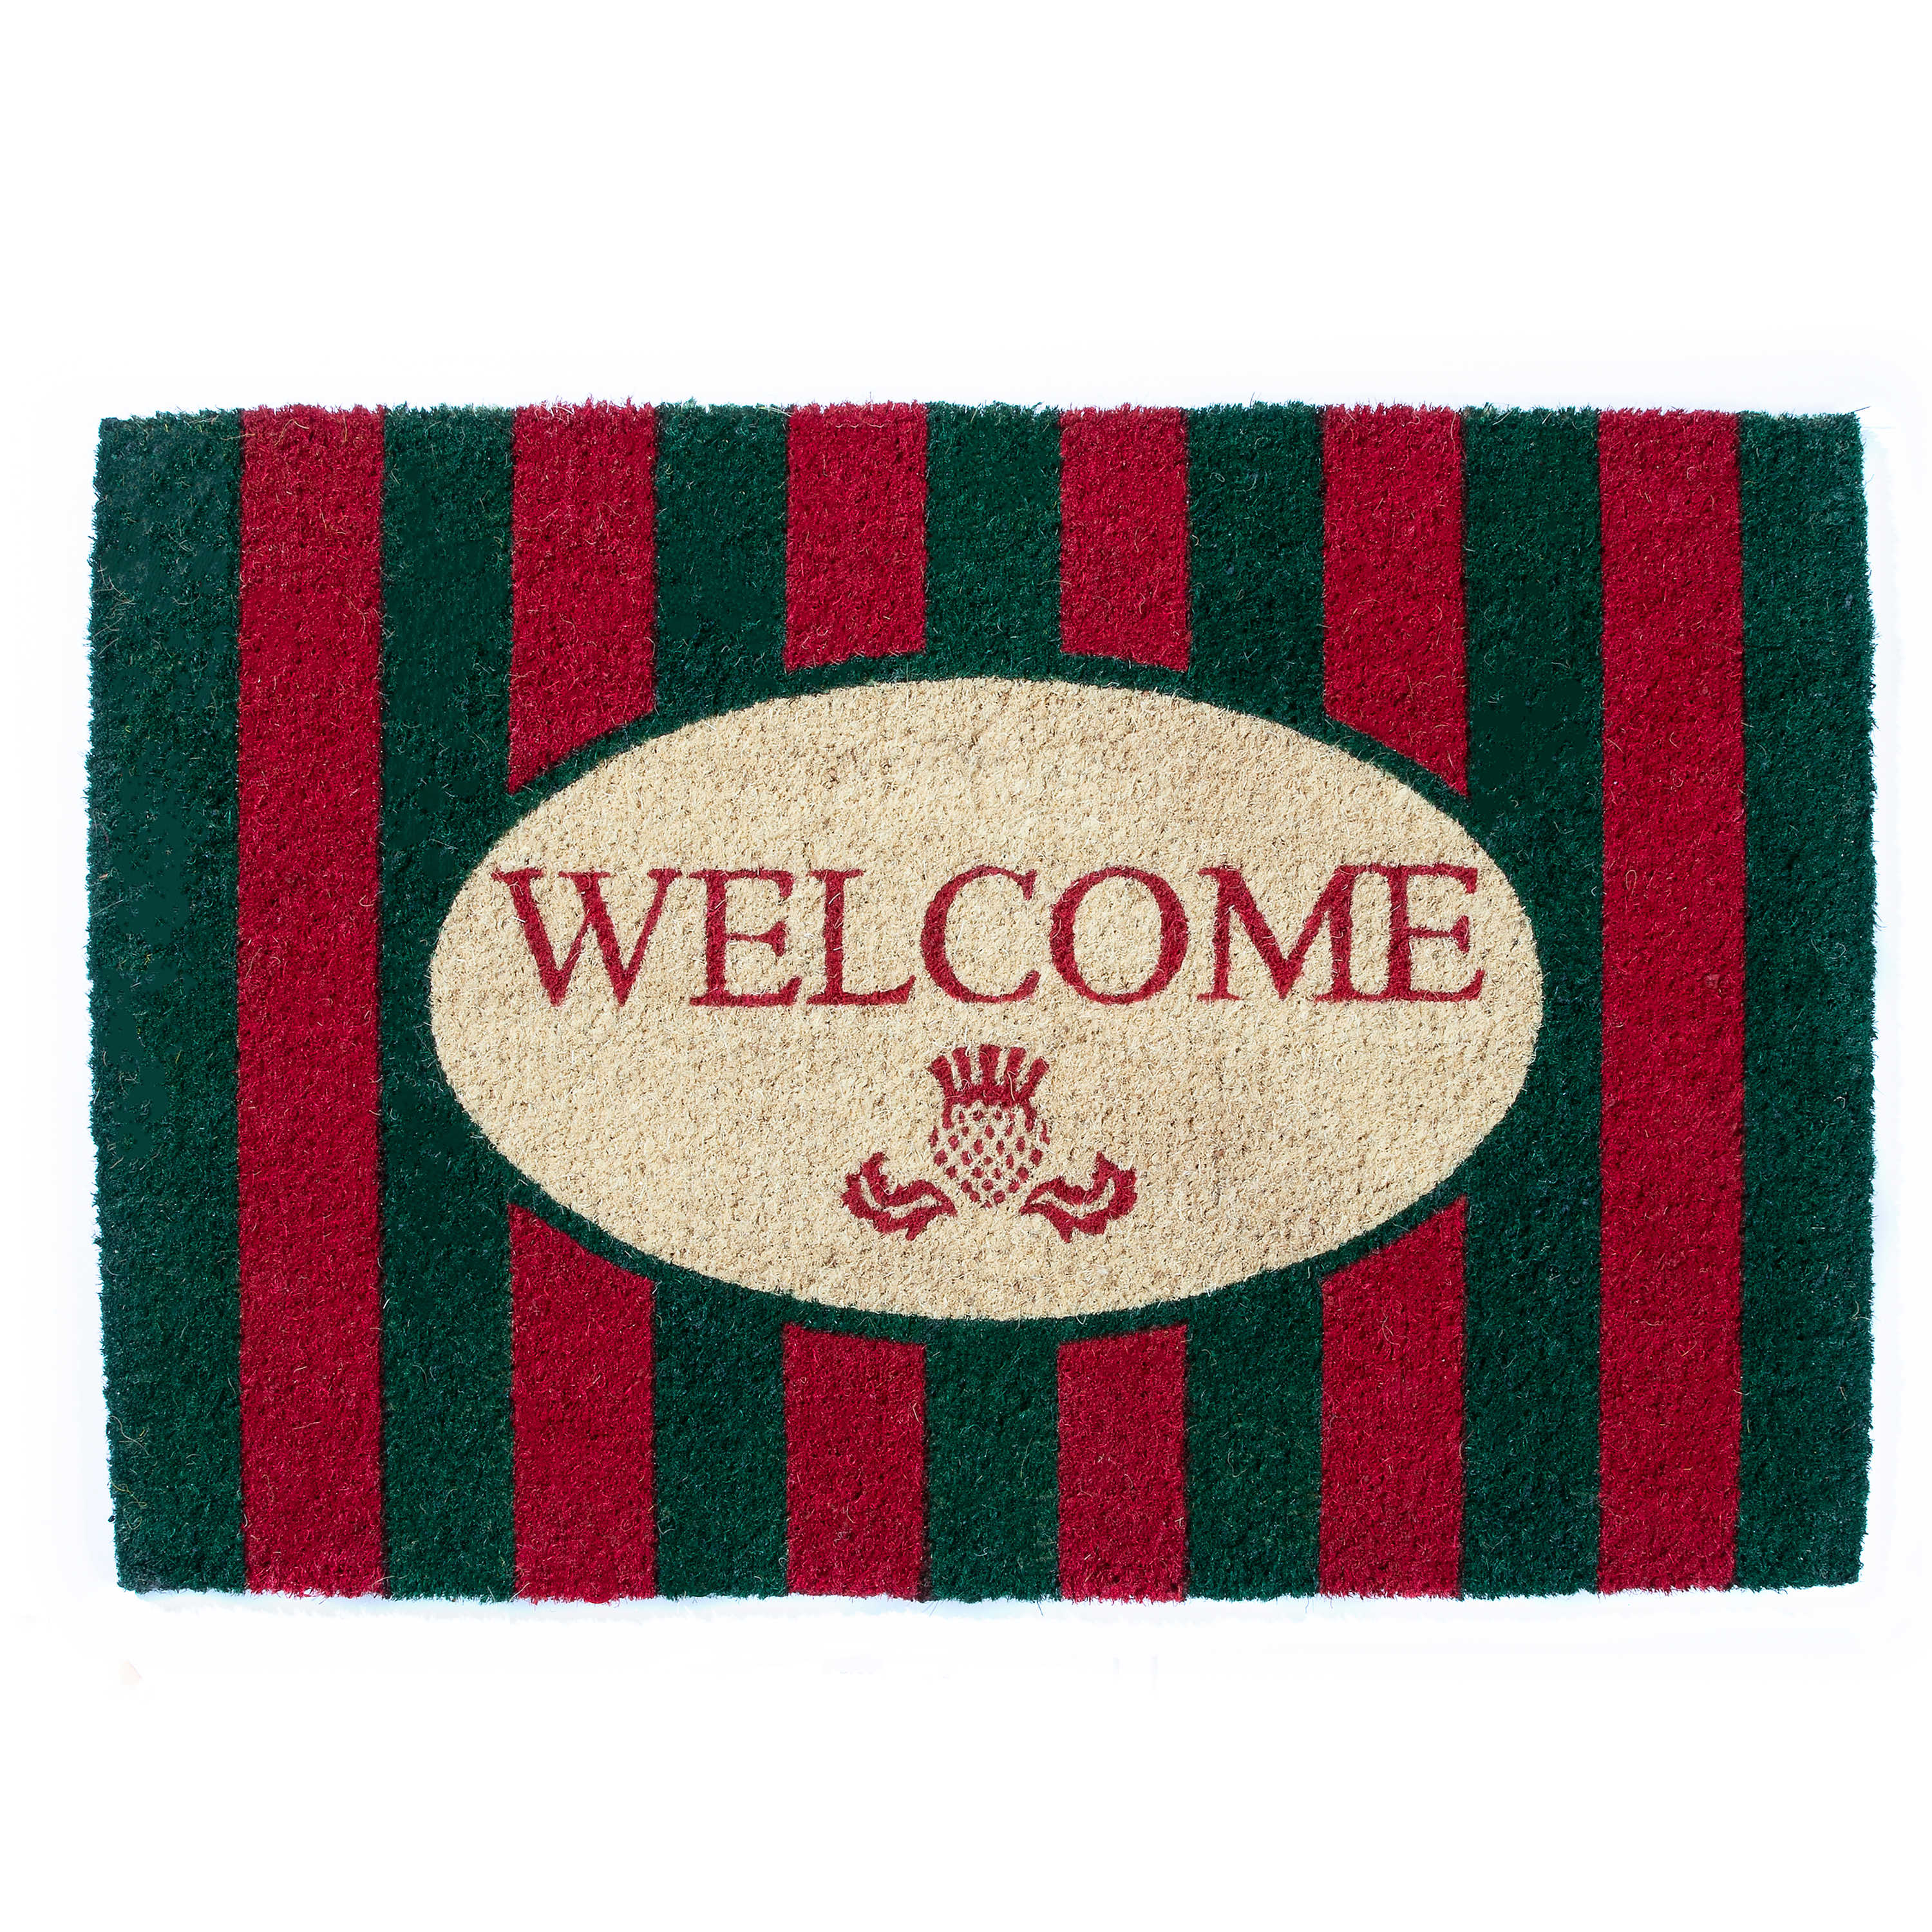 Awning Stripe Red & Green Welcome Entrance Mat mackenzie-childs Panama 0